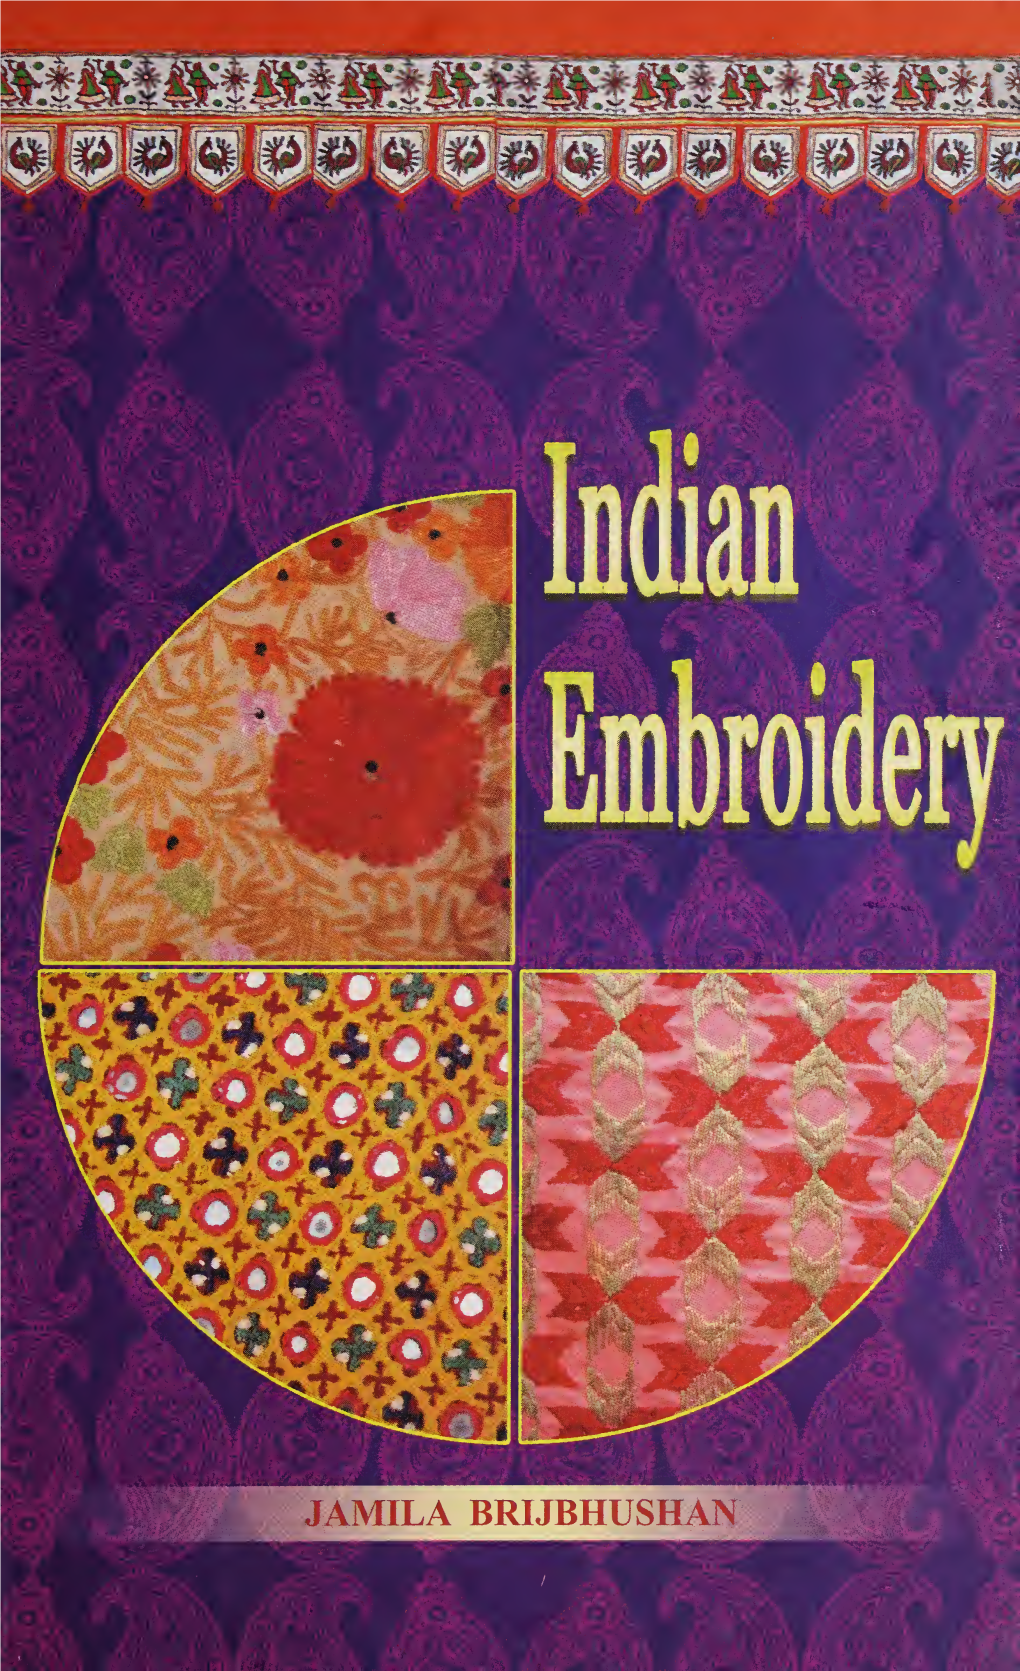 Indian Embroidery